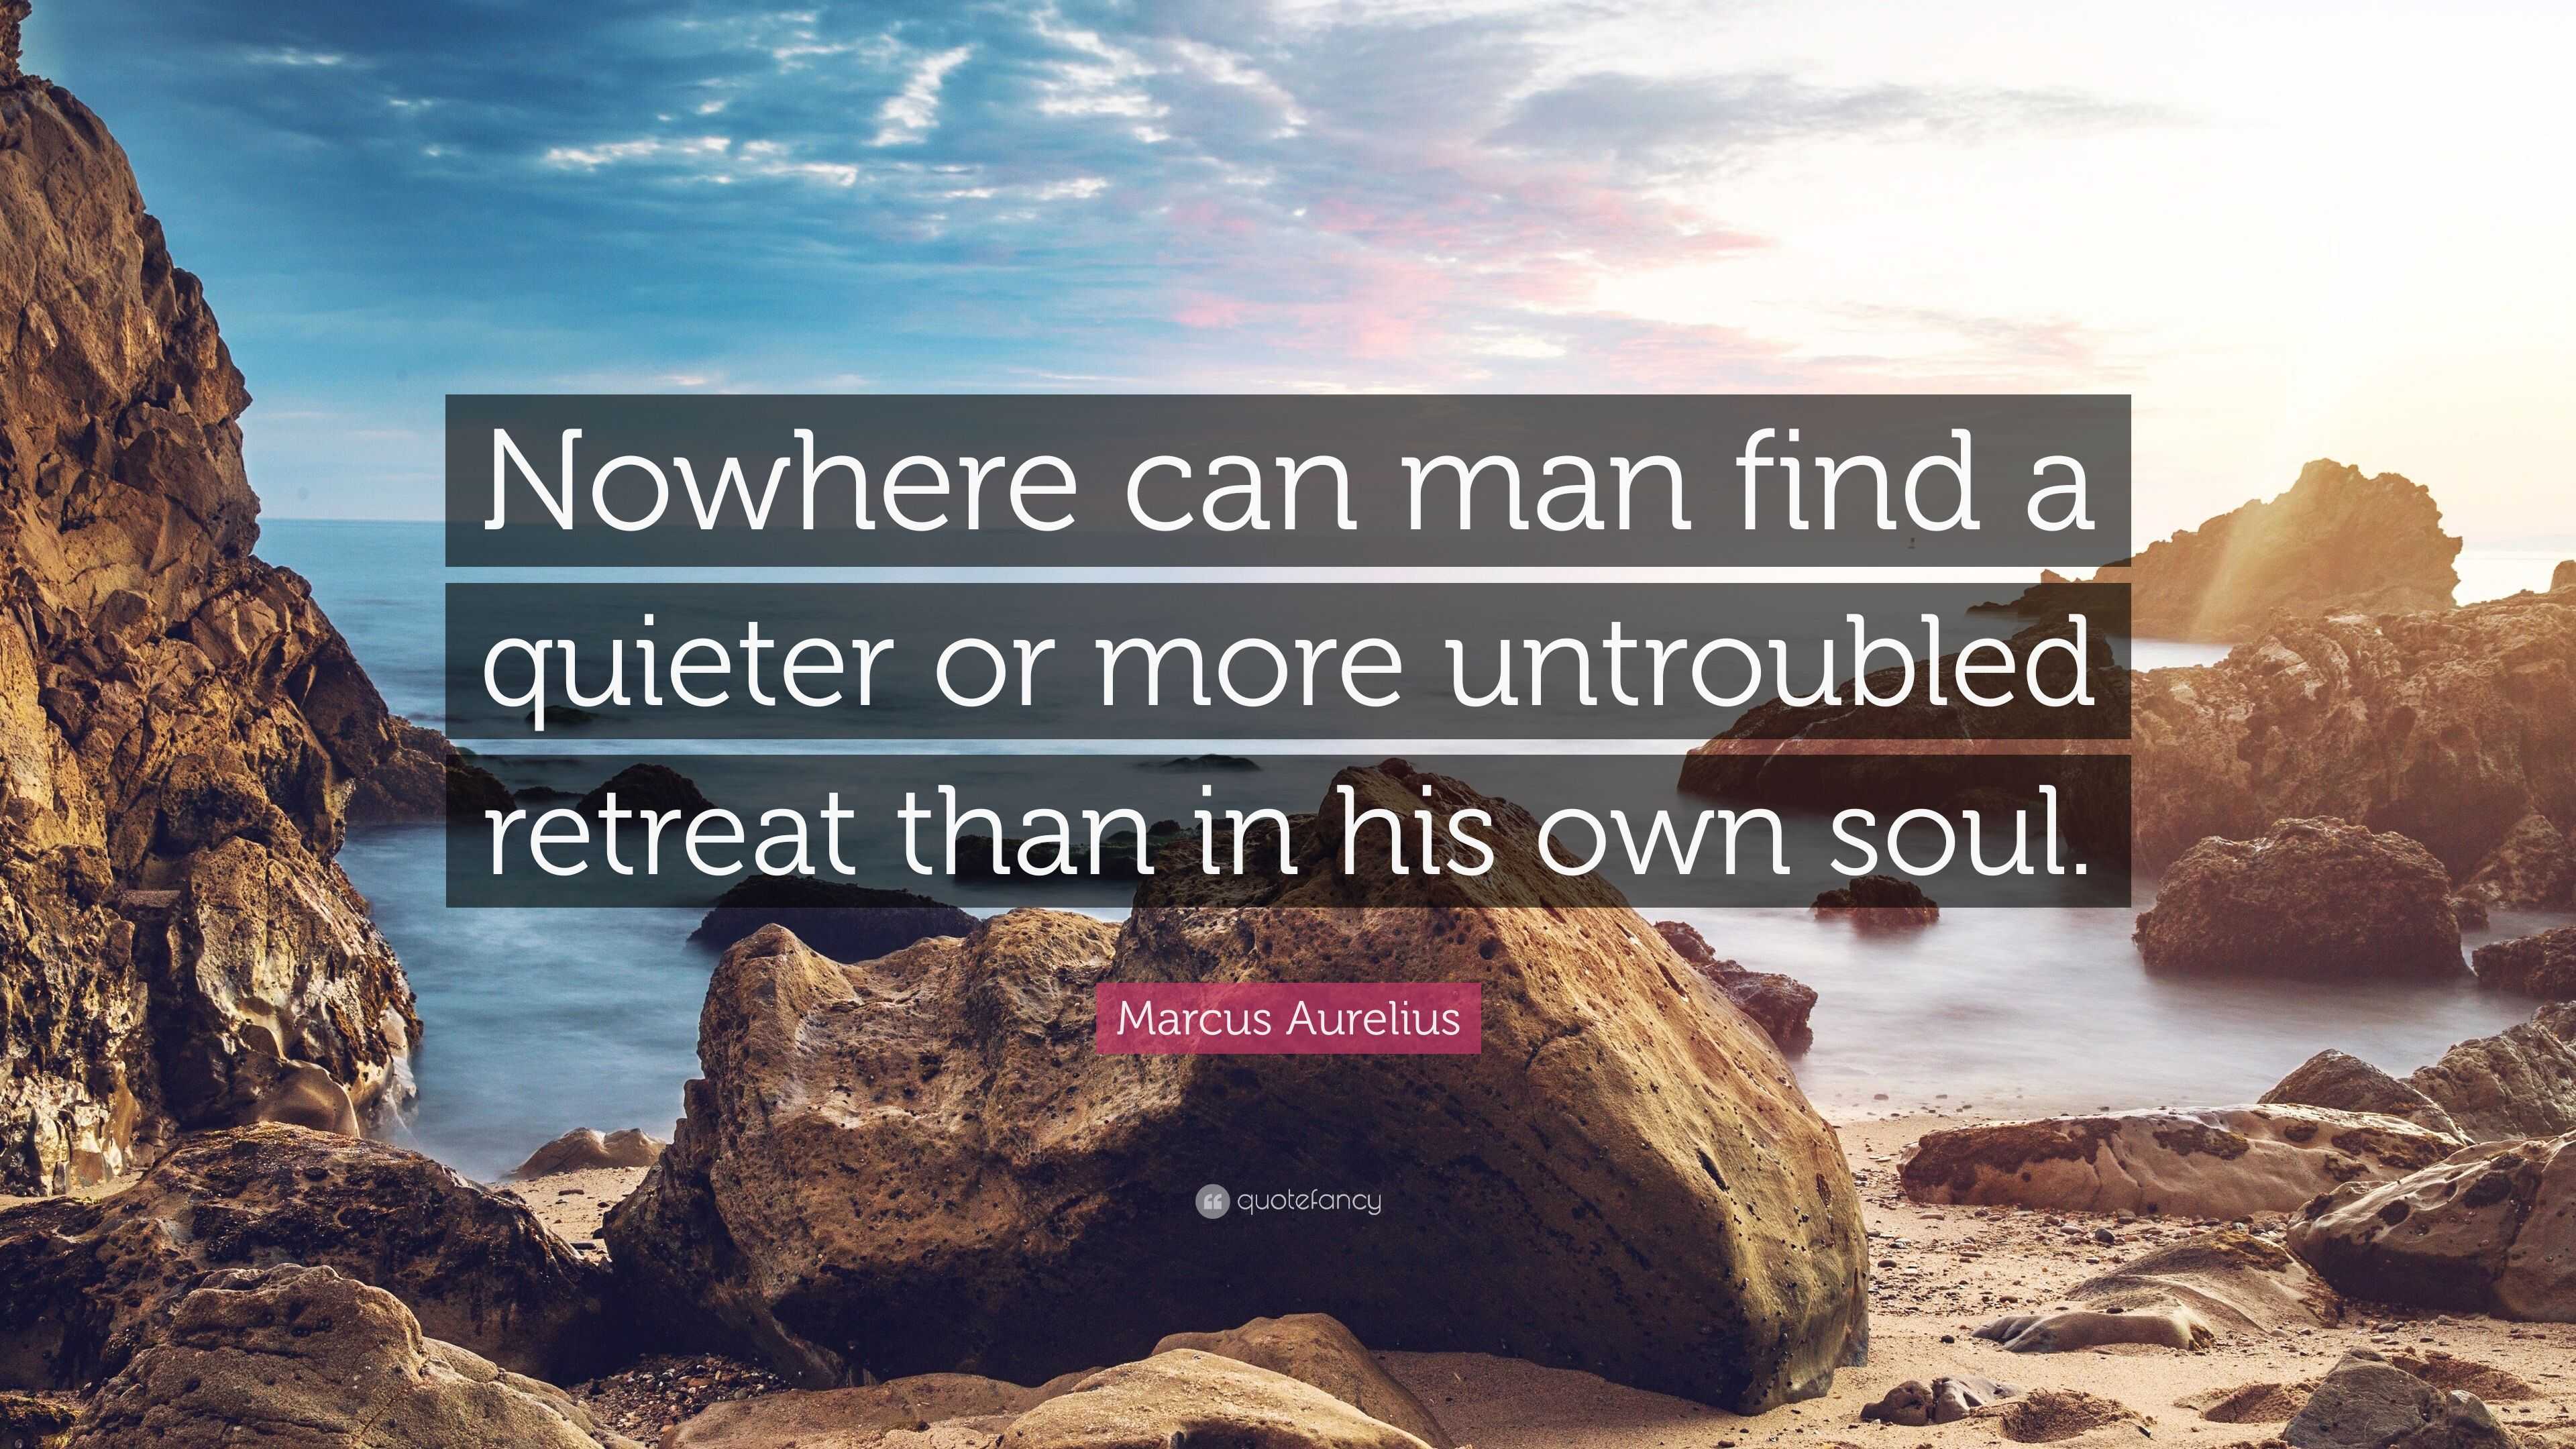 Marcus Aurelius Quote: “Nowhere can man find a quieter or more ...